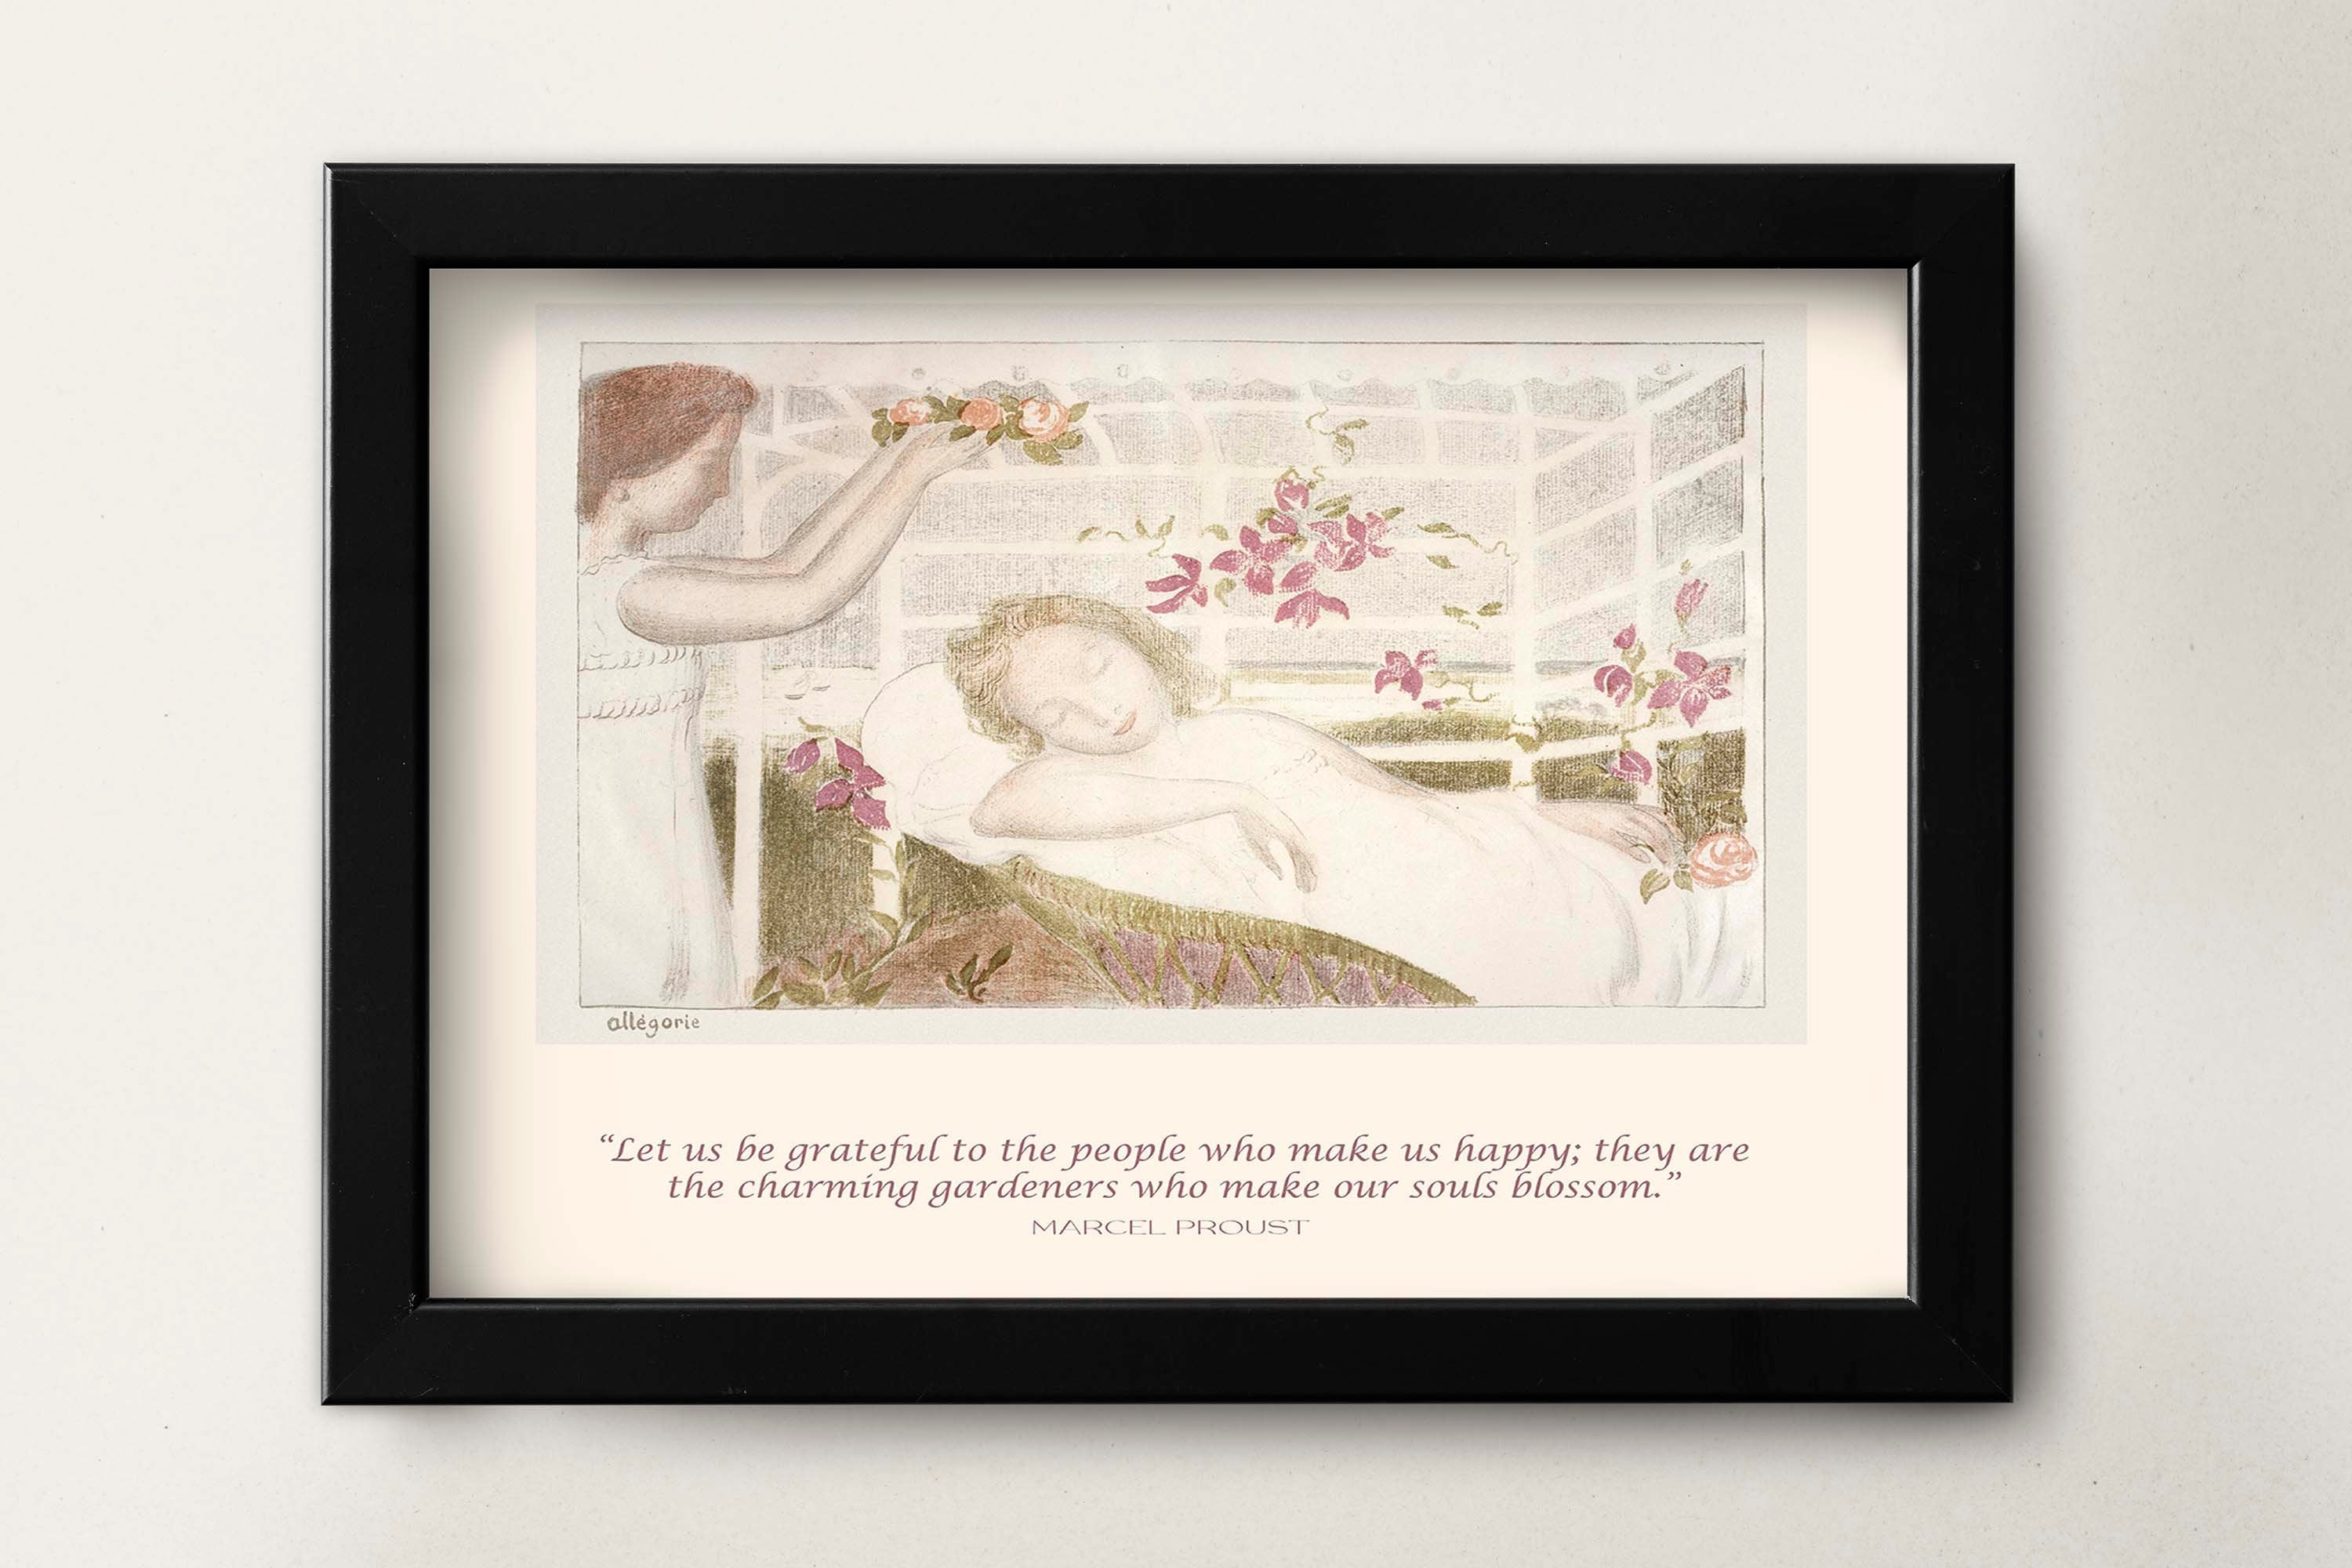 Marcel Proust and Maurice Denis Fine Art Print - Be Grateful To The People Who Make Us Happy